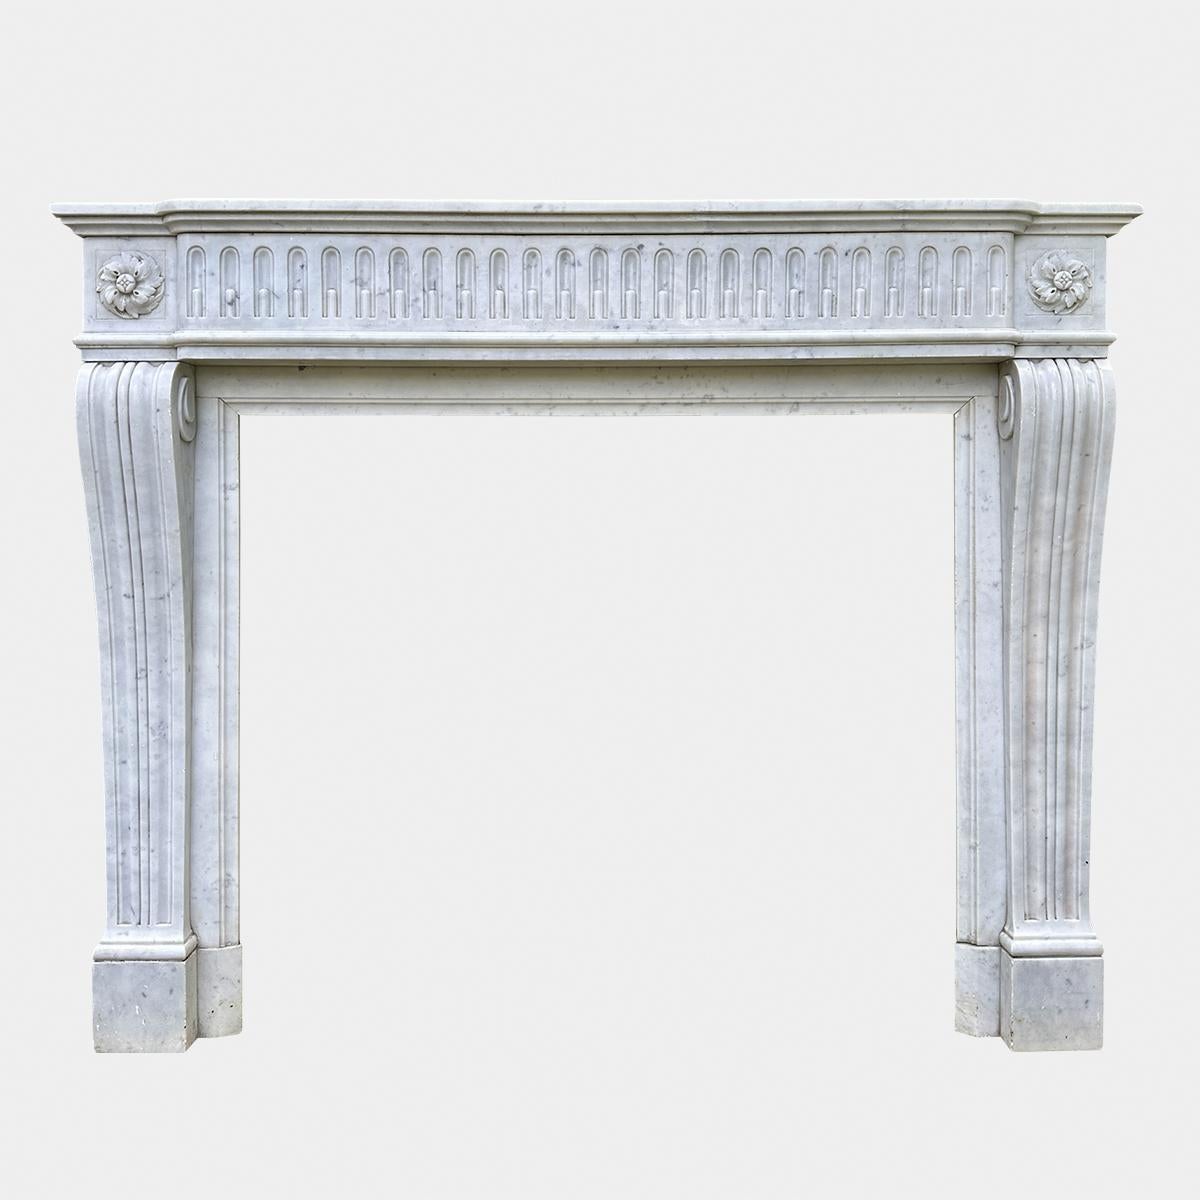 An antique French Louis XVI style fireplace in Italian Carrara marble. The fluted console jambs with carved square patarae corner blocks and bowed running frieze of stop fluted design. The shelf again bow fronted conforming with the frieze. Circa